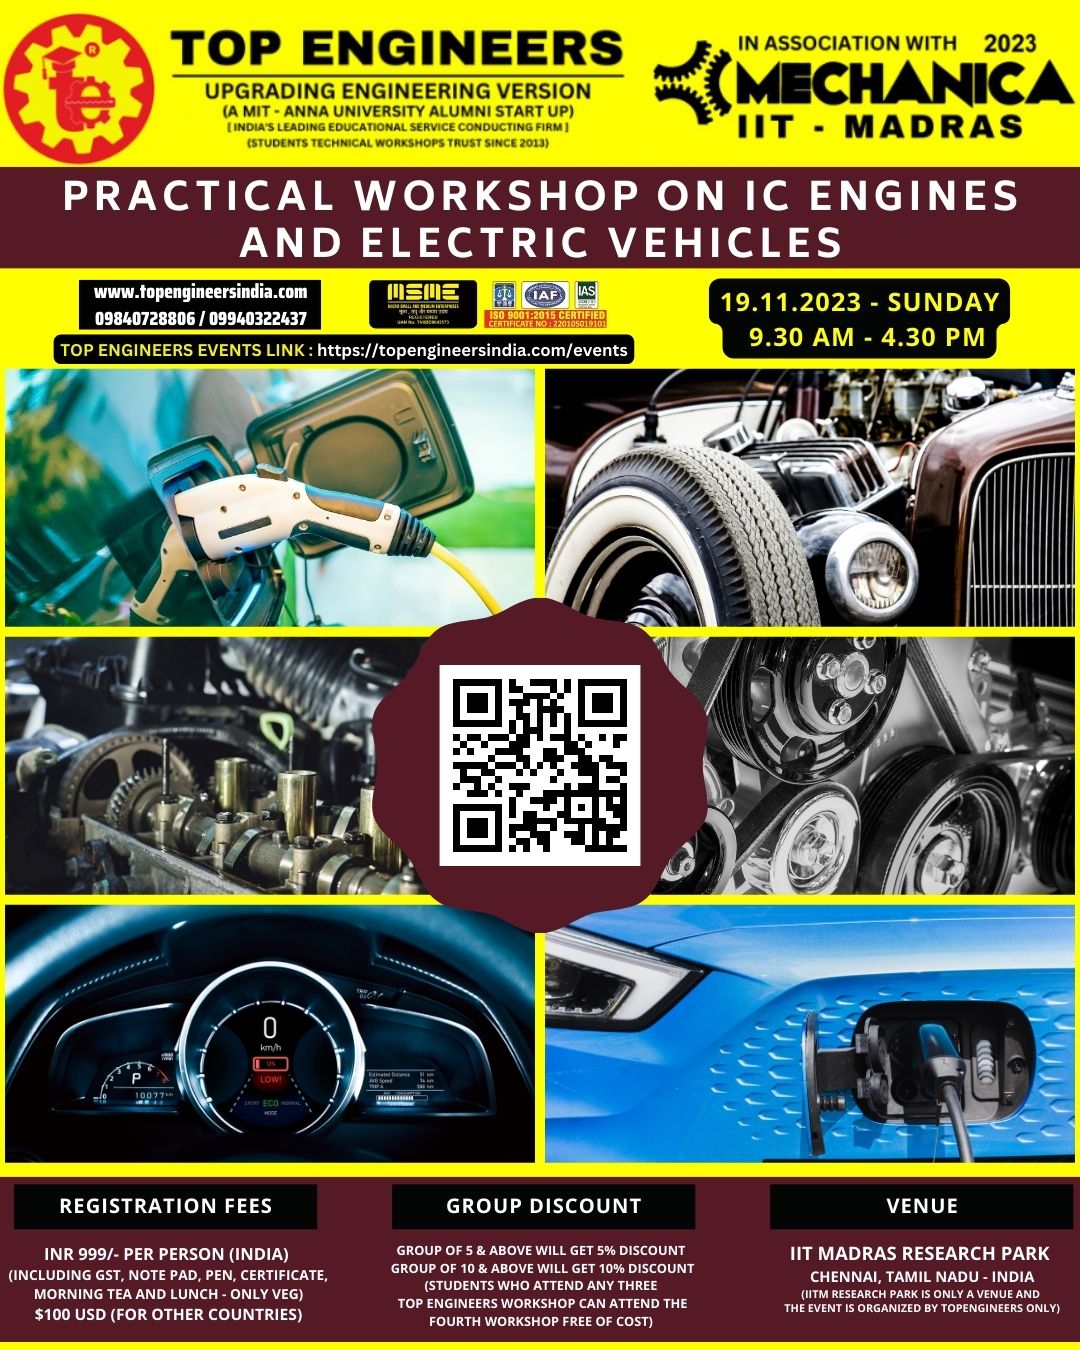 Practical Workshop on IC Engines and Electric Vehicles 2023